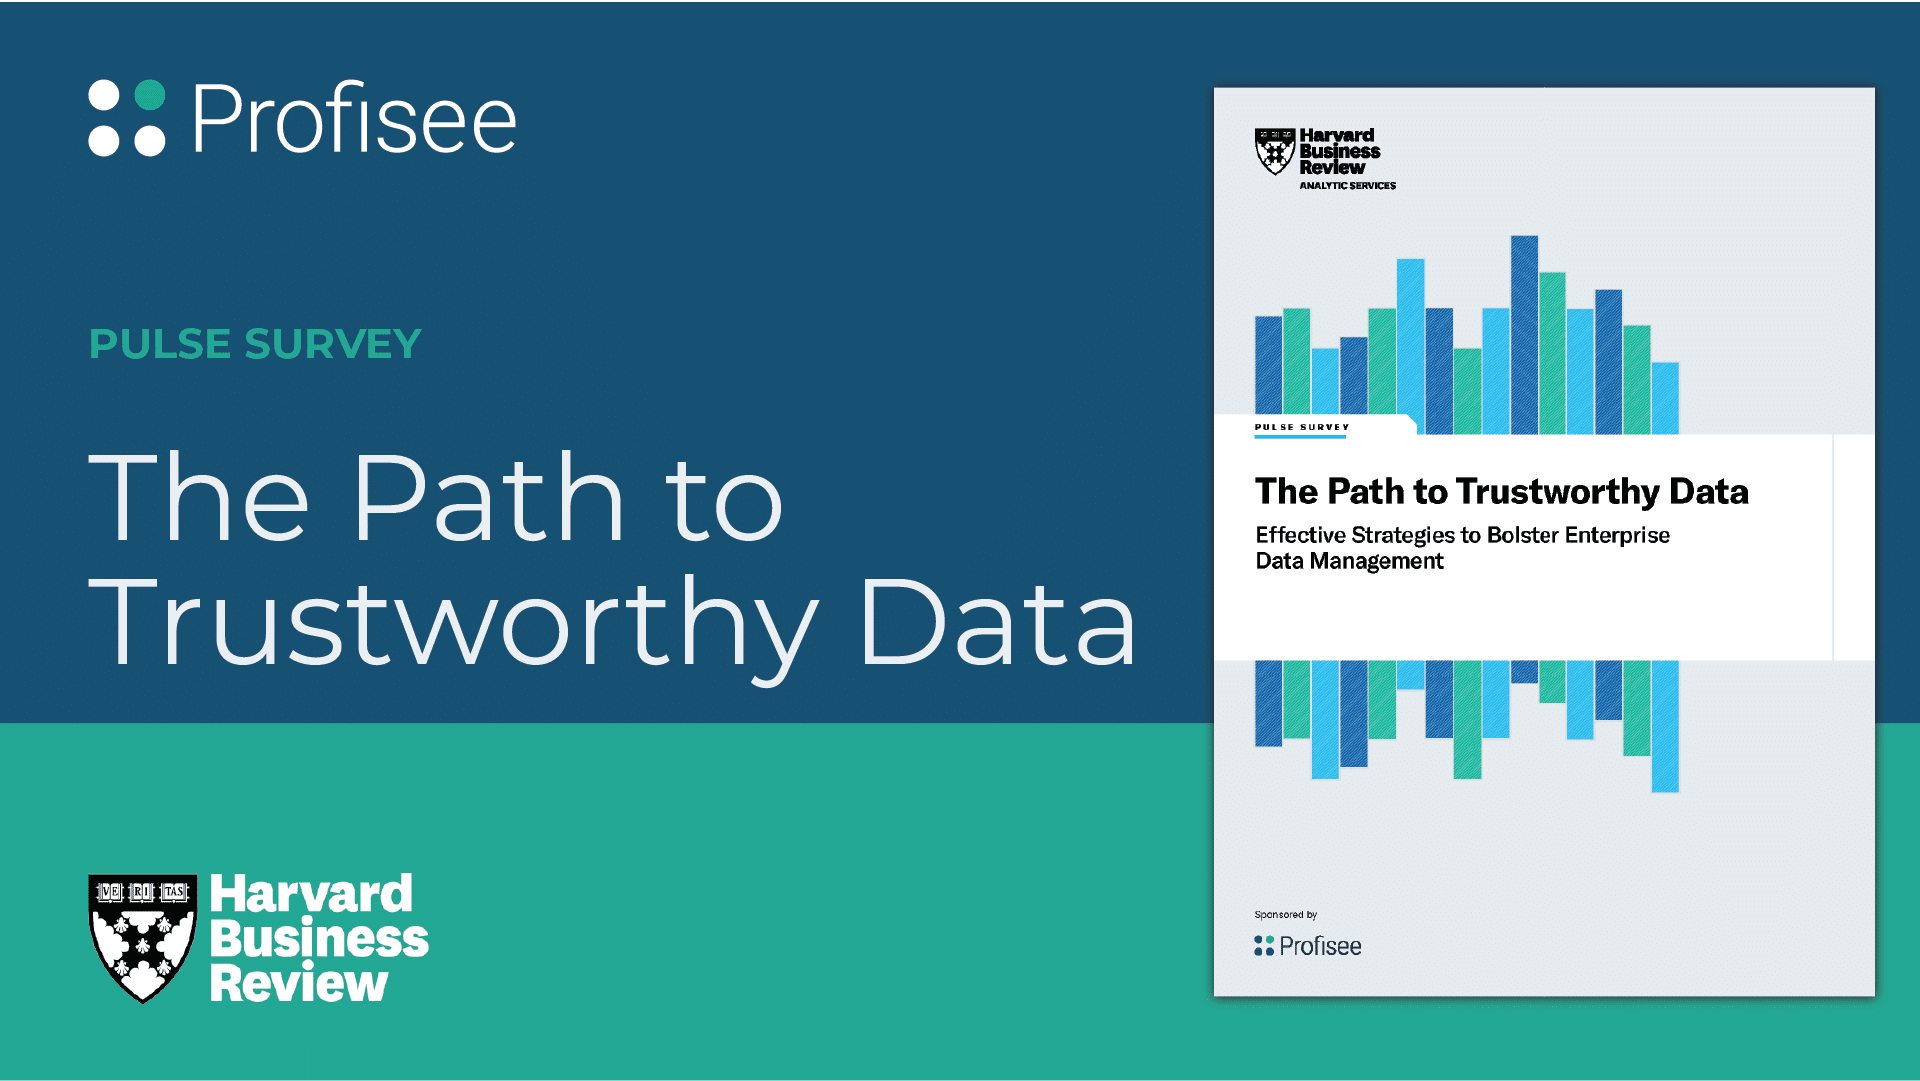 Harvard Business Review Analytic Services - The Path to Trustworthy Data